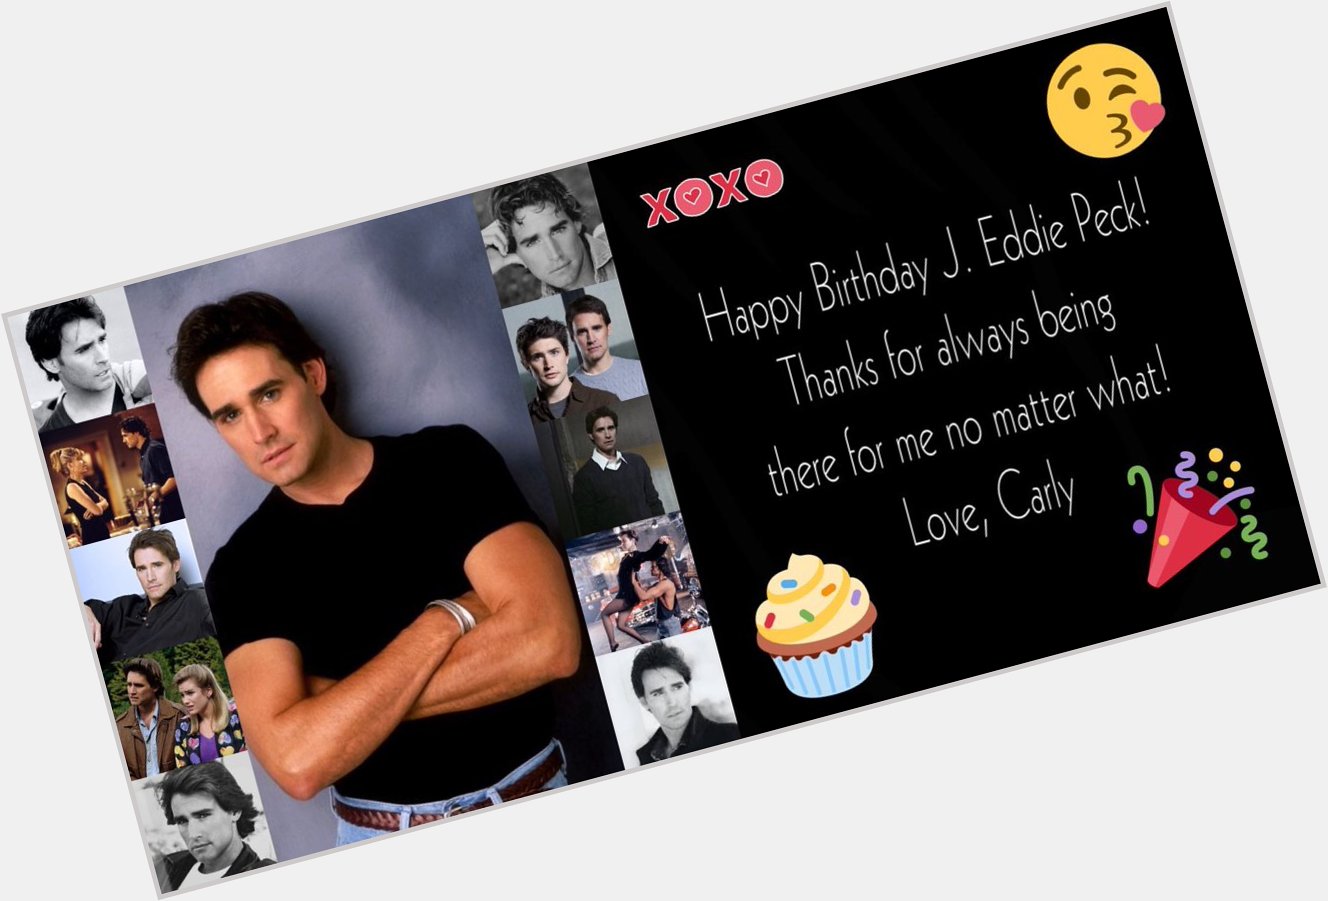 To my friend and one of the favortie guys in daytime happy bday to eddie peck and have awsome bday 